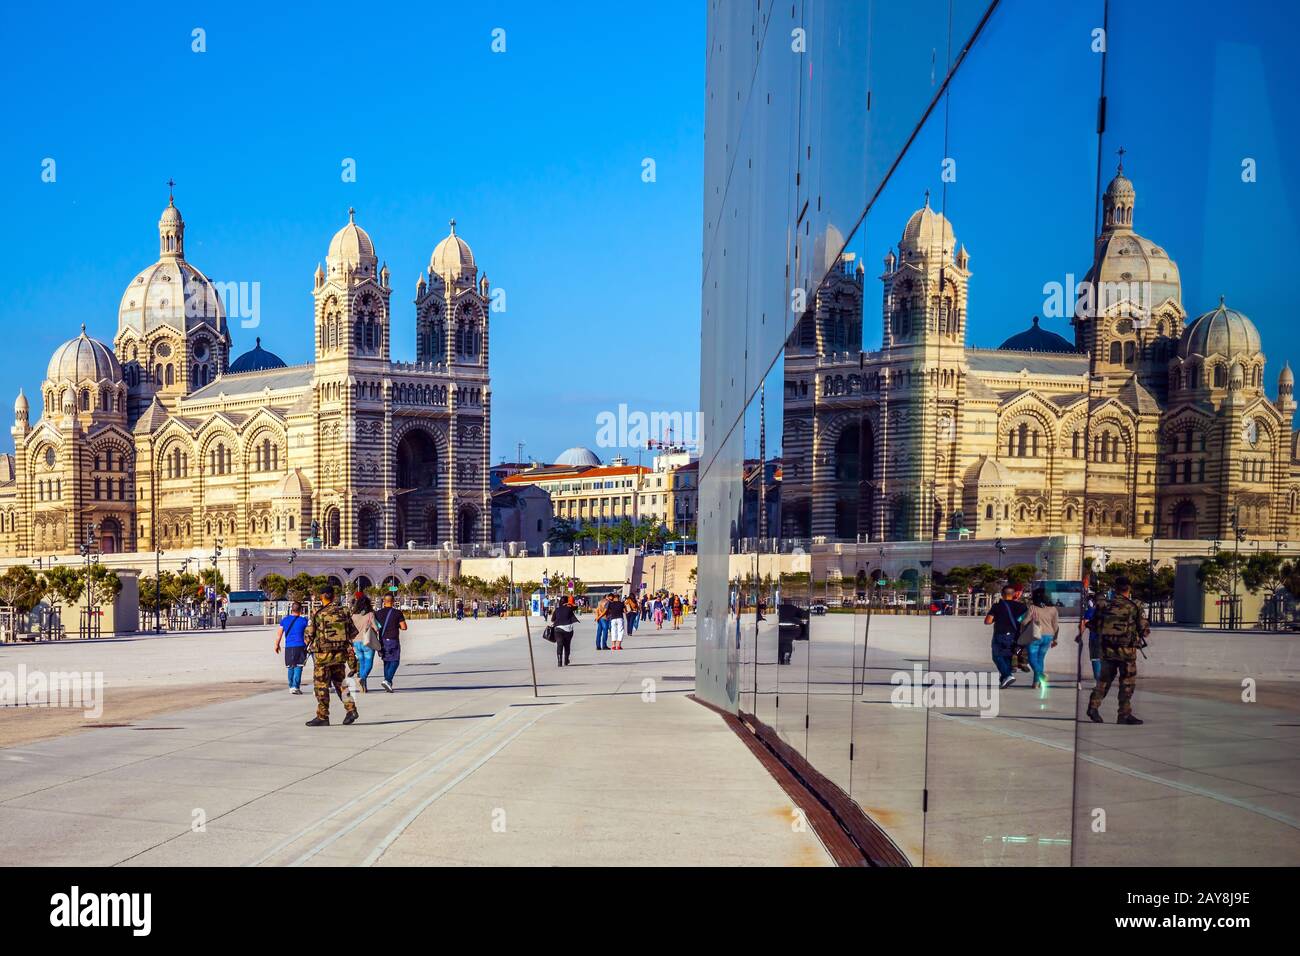 Cathedral of Saint Mary Major is reflected in the mirrored wall Stock Photo